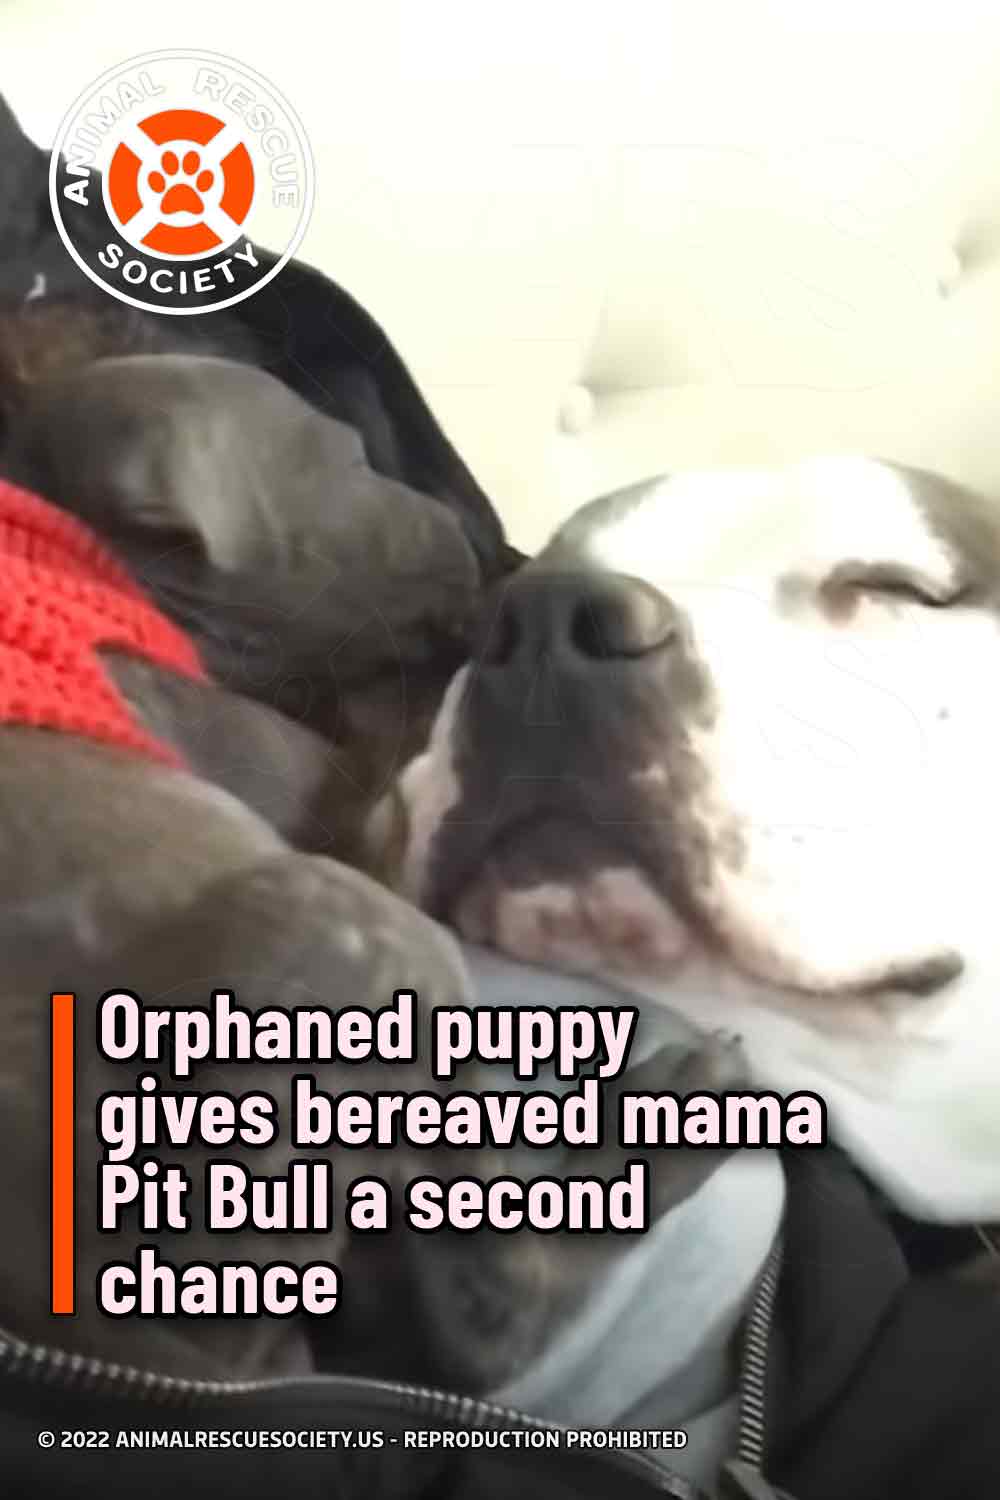 Orphaned puppy gives bereaved mama Pit Bull a second chance